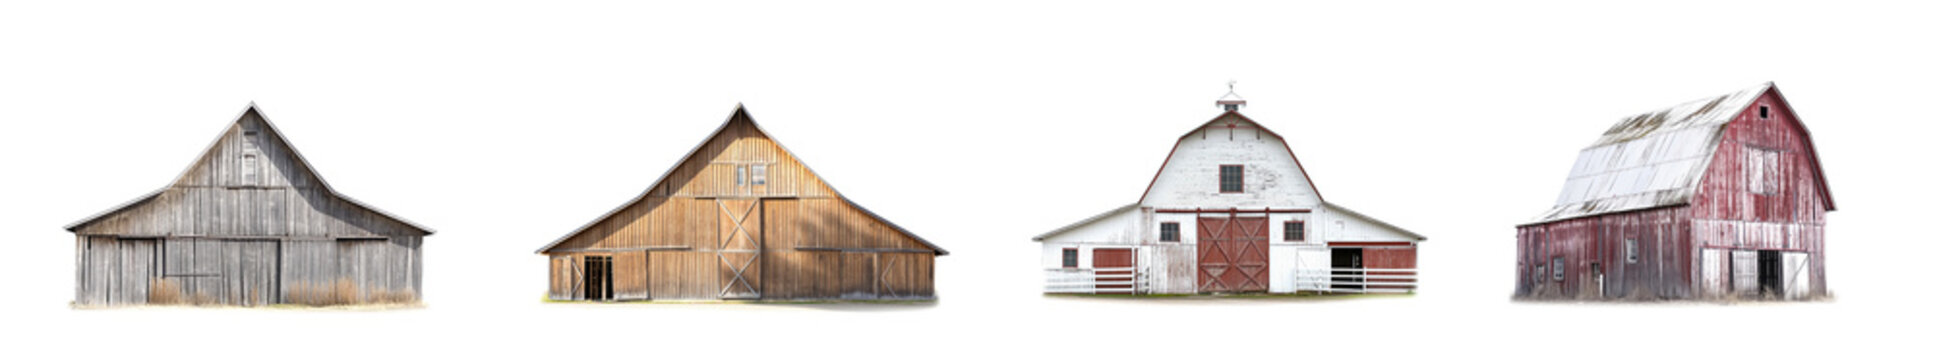 Old ranch barn set isolated on a white background. Collection of farm barns. Ranch barns. Rural barn. Wooden barn. Made of wood. Abandoned and old. Various styles of farm barns made of wood.